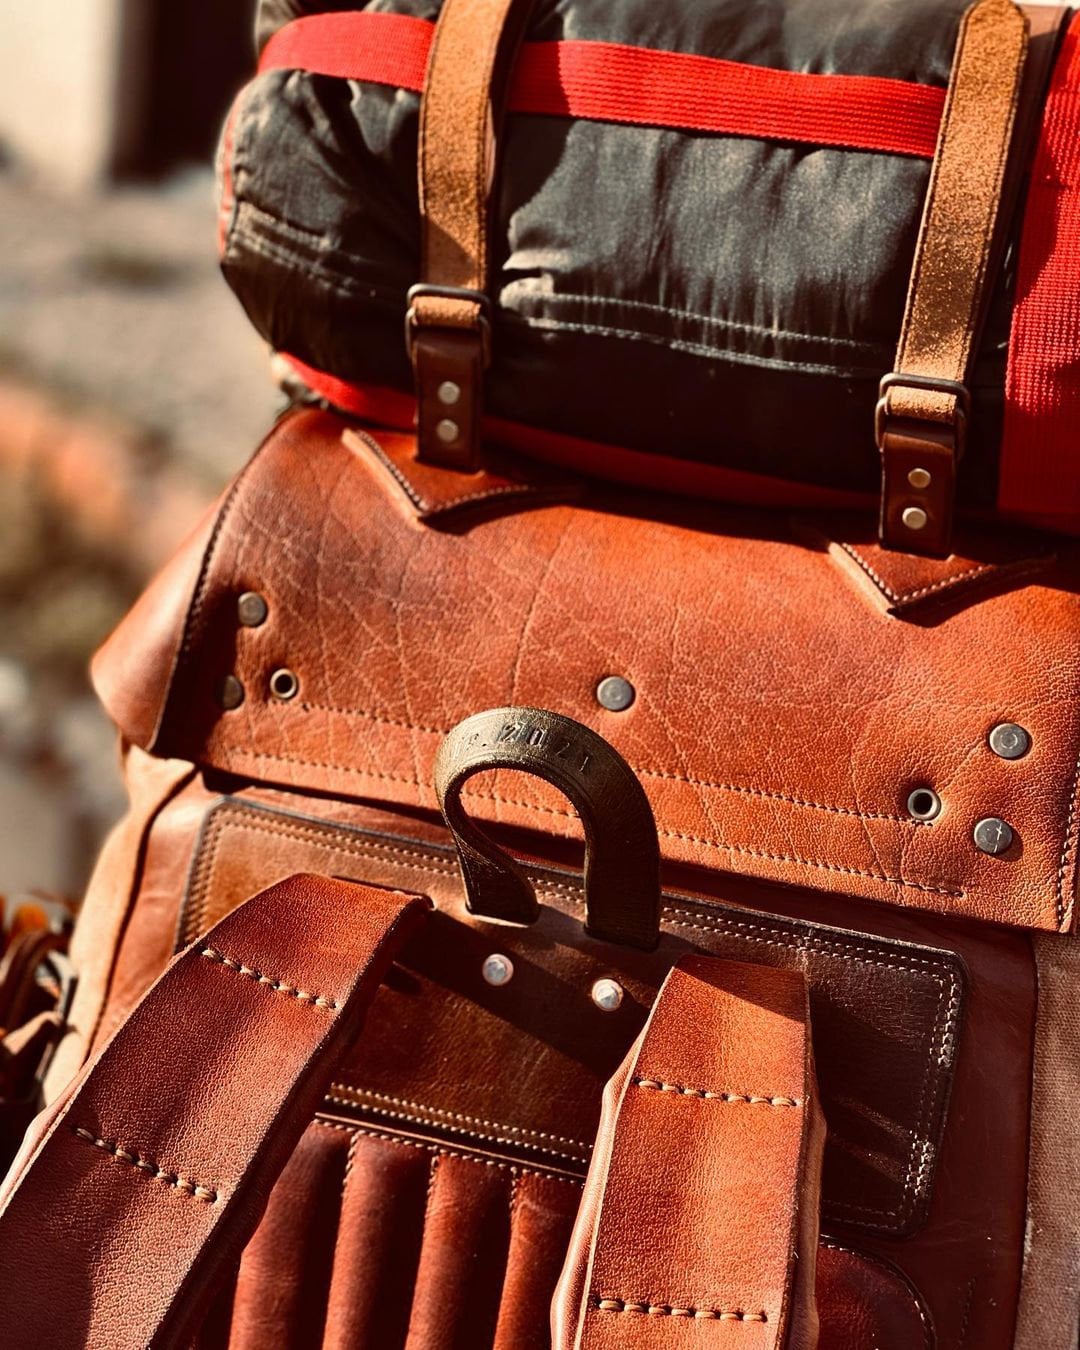 Only 1 Pieces Left Discount 799 to 599, Handmade Leather and Waxed Backpack for Travel, Camping | inside 45 Liter | Personalization bushcraft - camping - hiking backpack 99percenthandmade   